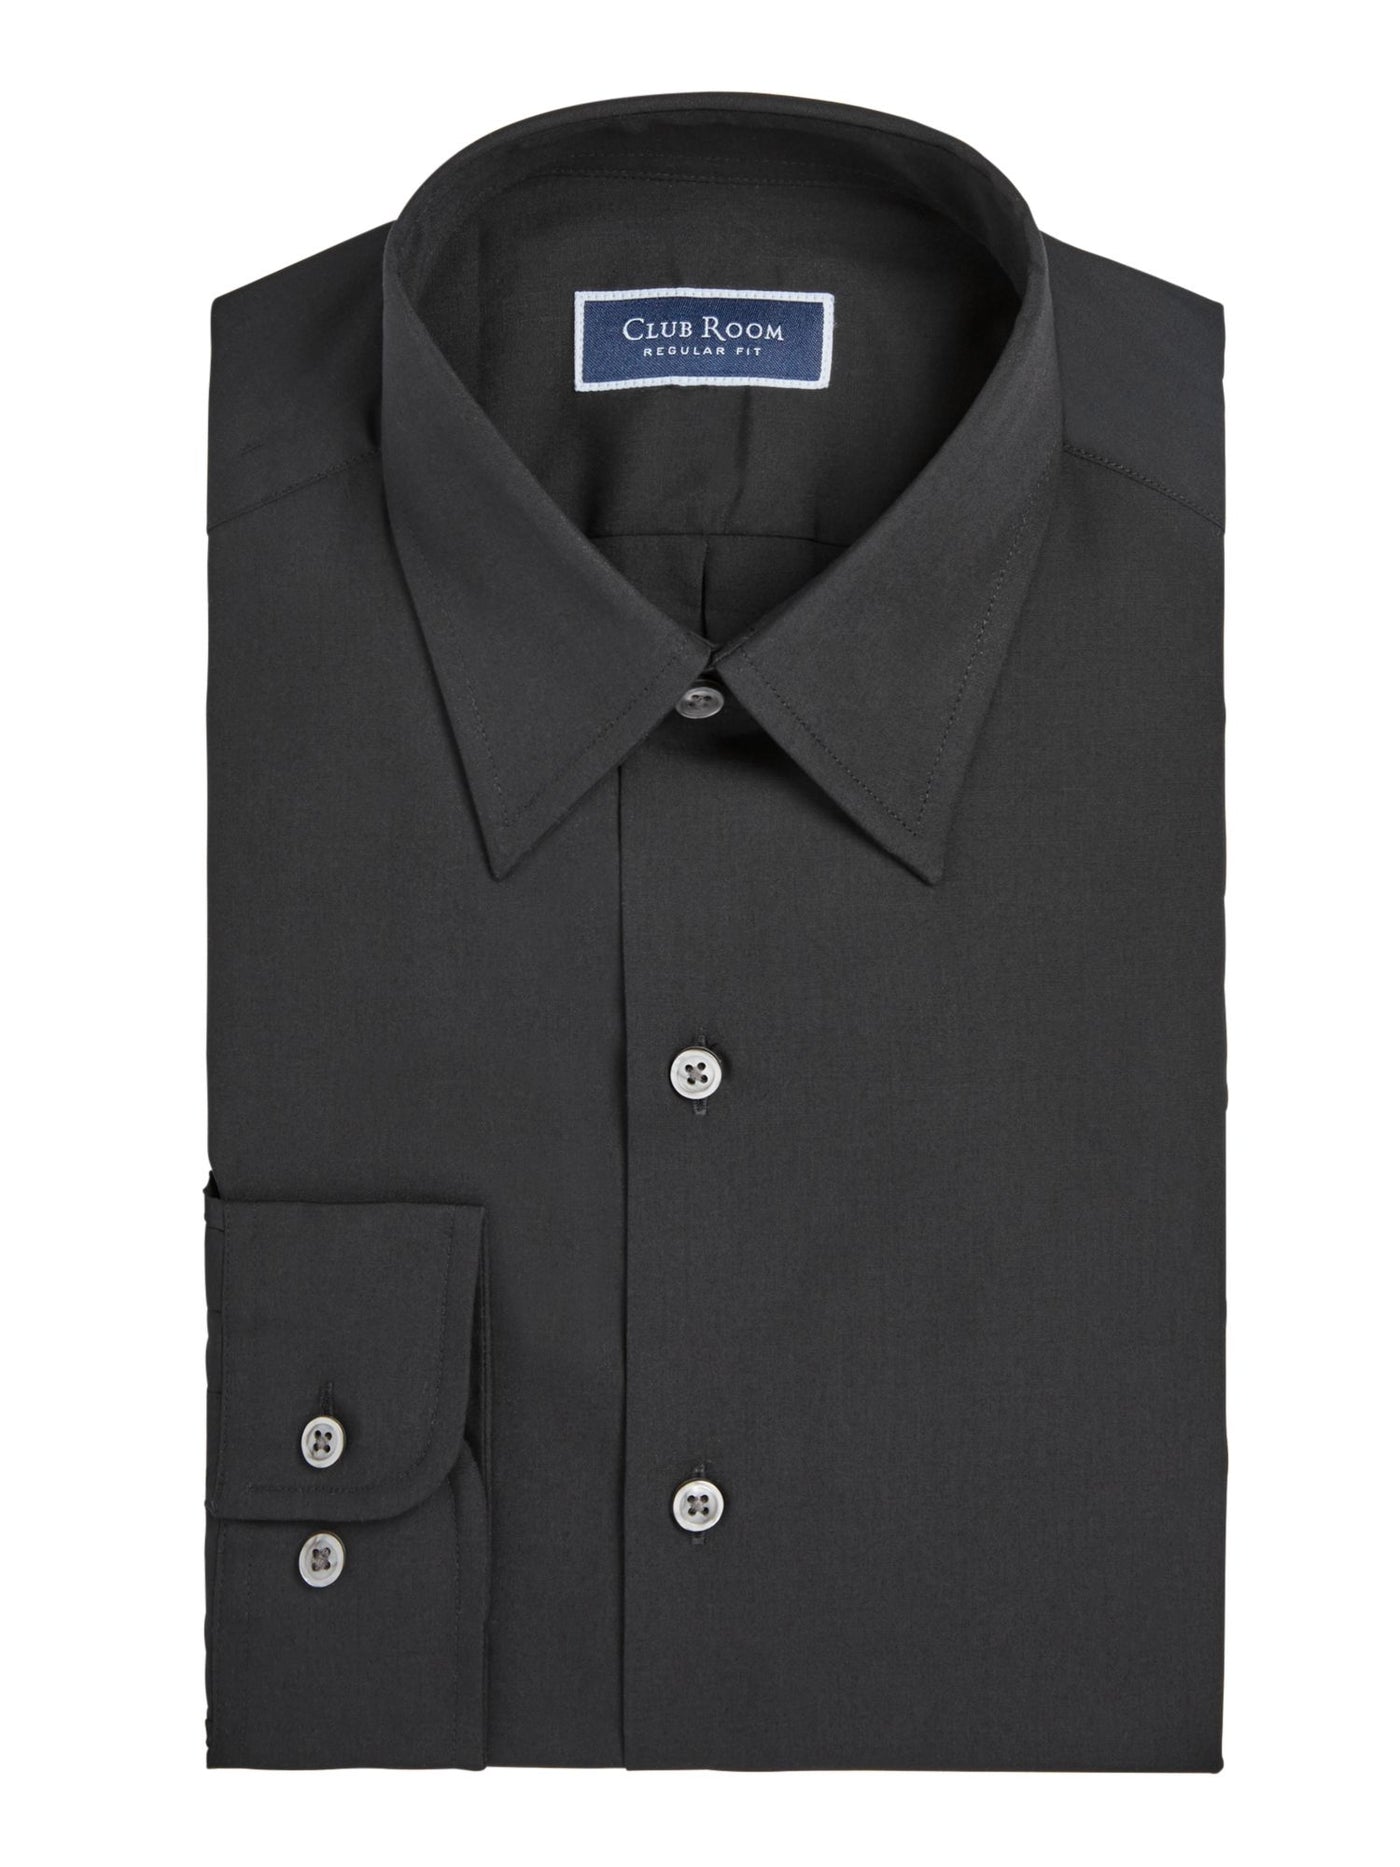 CLUBROOM Mens Black Easy Care, Point Collar Classic Fit Cotton Dress Shirt L 16.5- 32/33